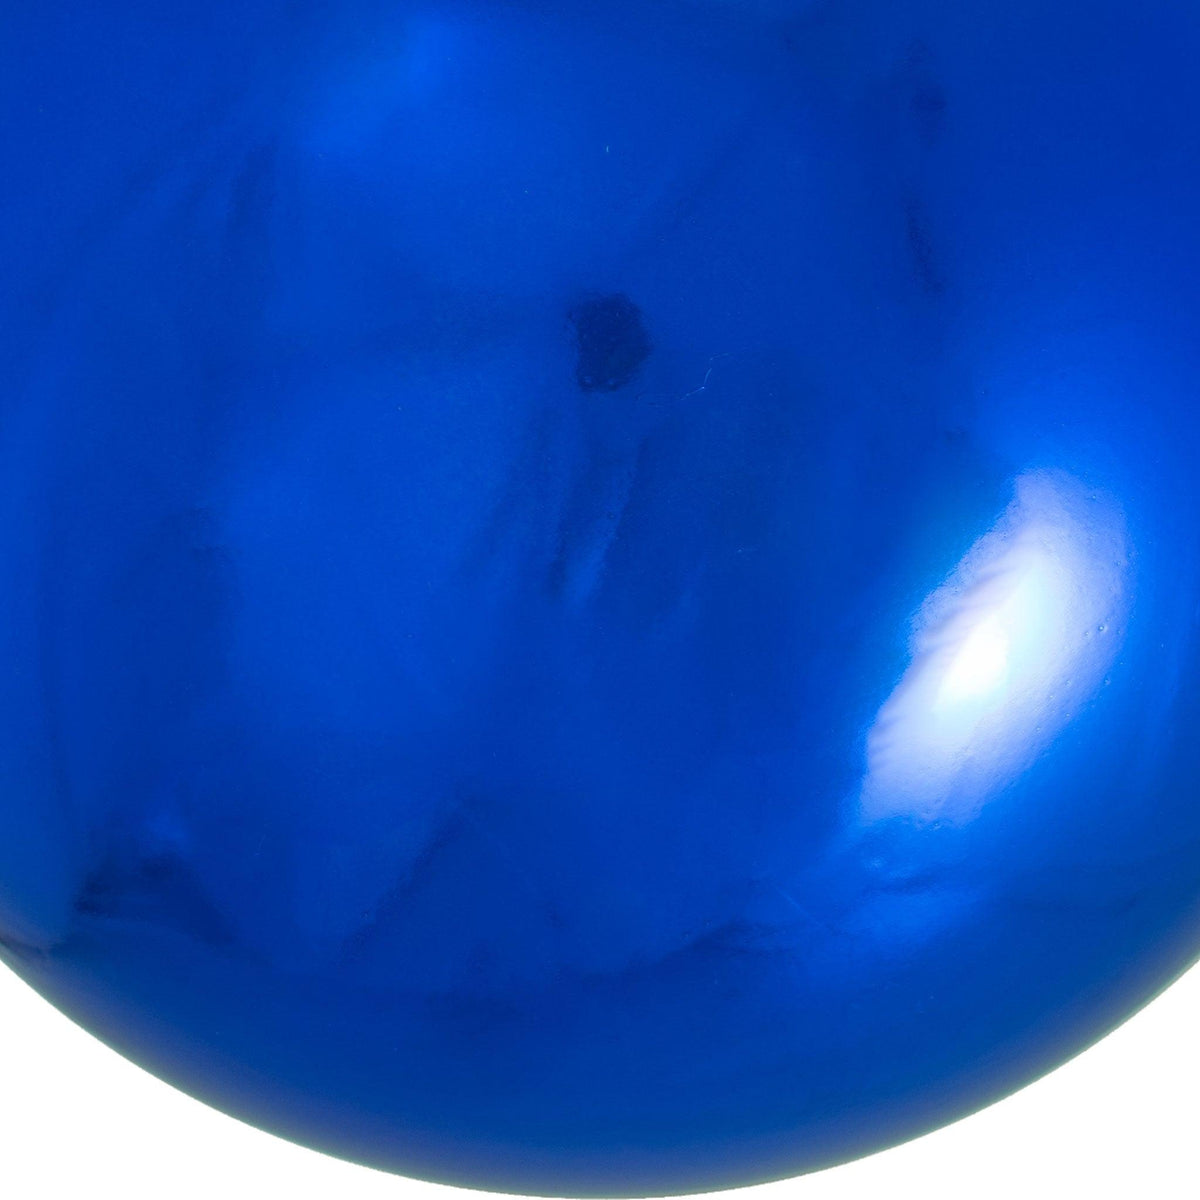 Upclose photo of the color and finish on the shiny blue 12in diameter ball ornaments.